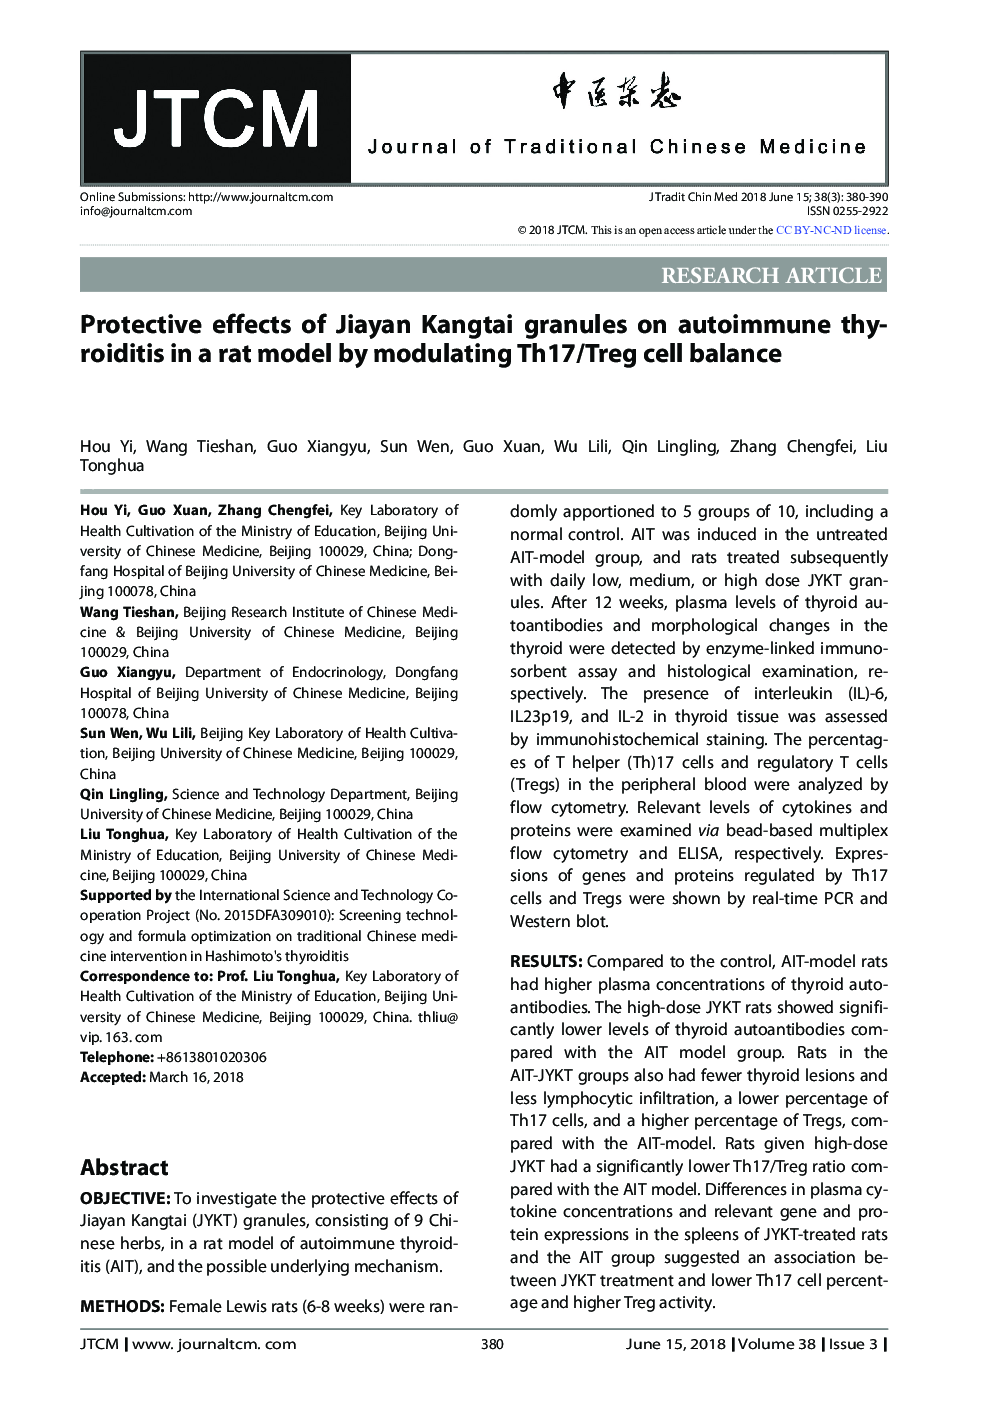 Protective effects of Jiayan Kangtai granules on autoimmune thyroiditis in a rat model by modulating Th17/Treg cell balance